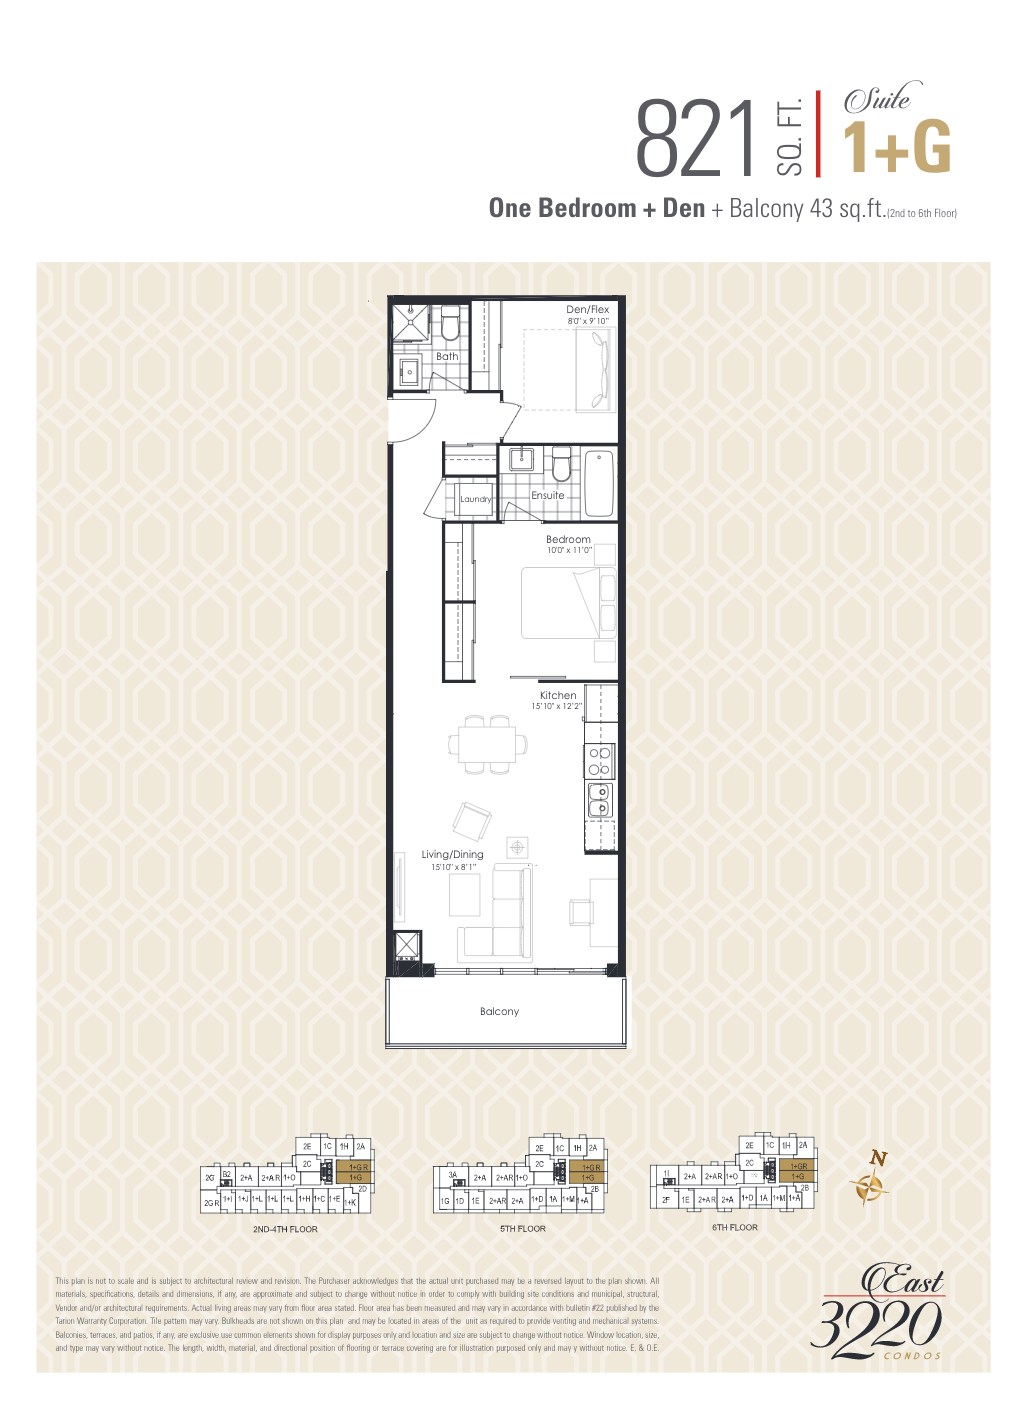  1+G  Floor Plan of East 3220 Condos with undefined beds